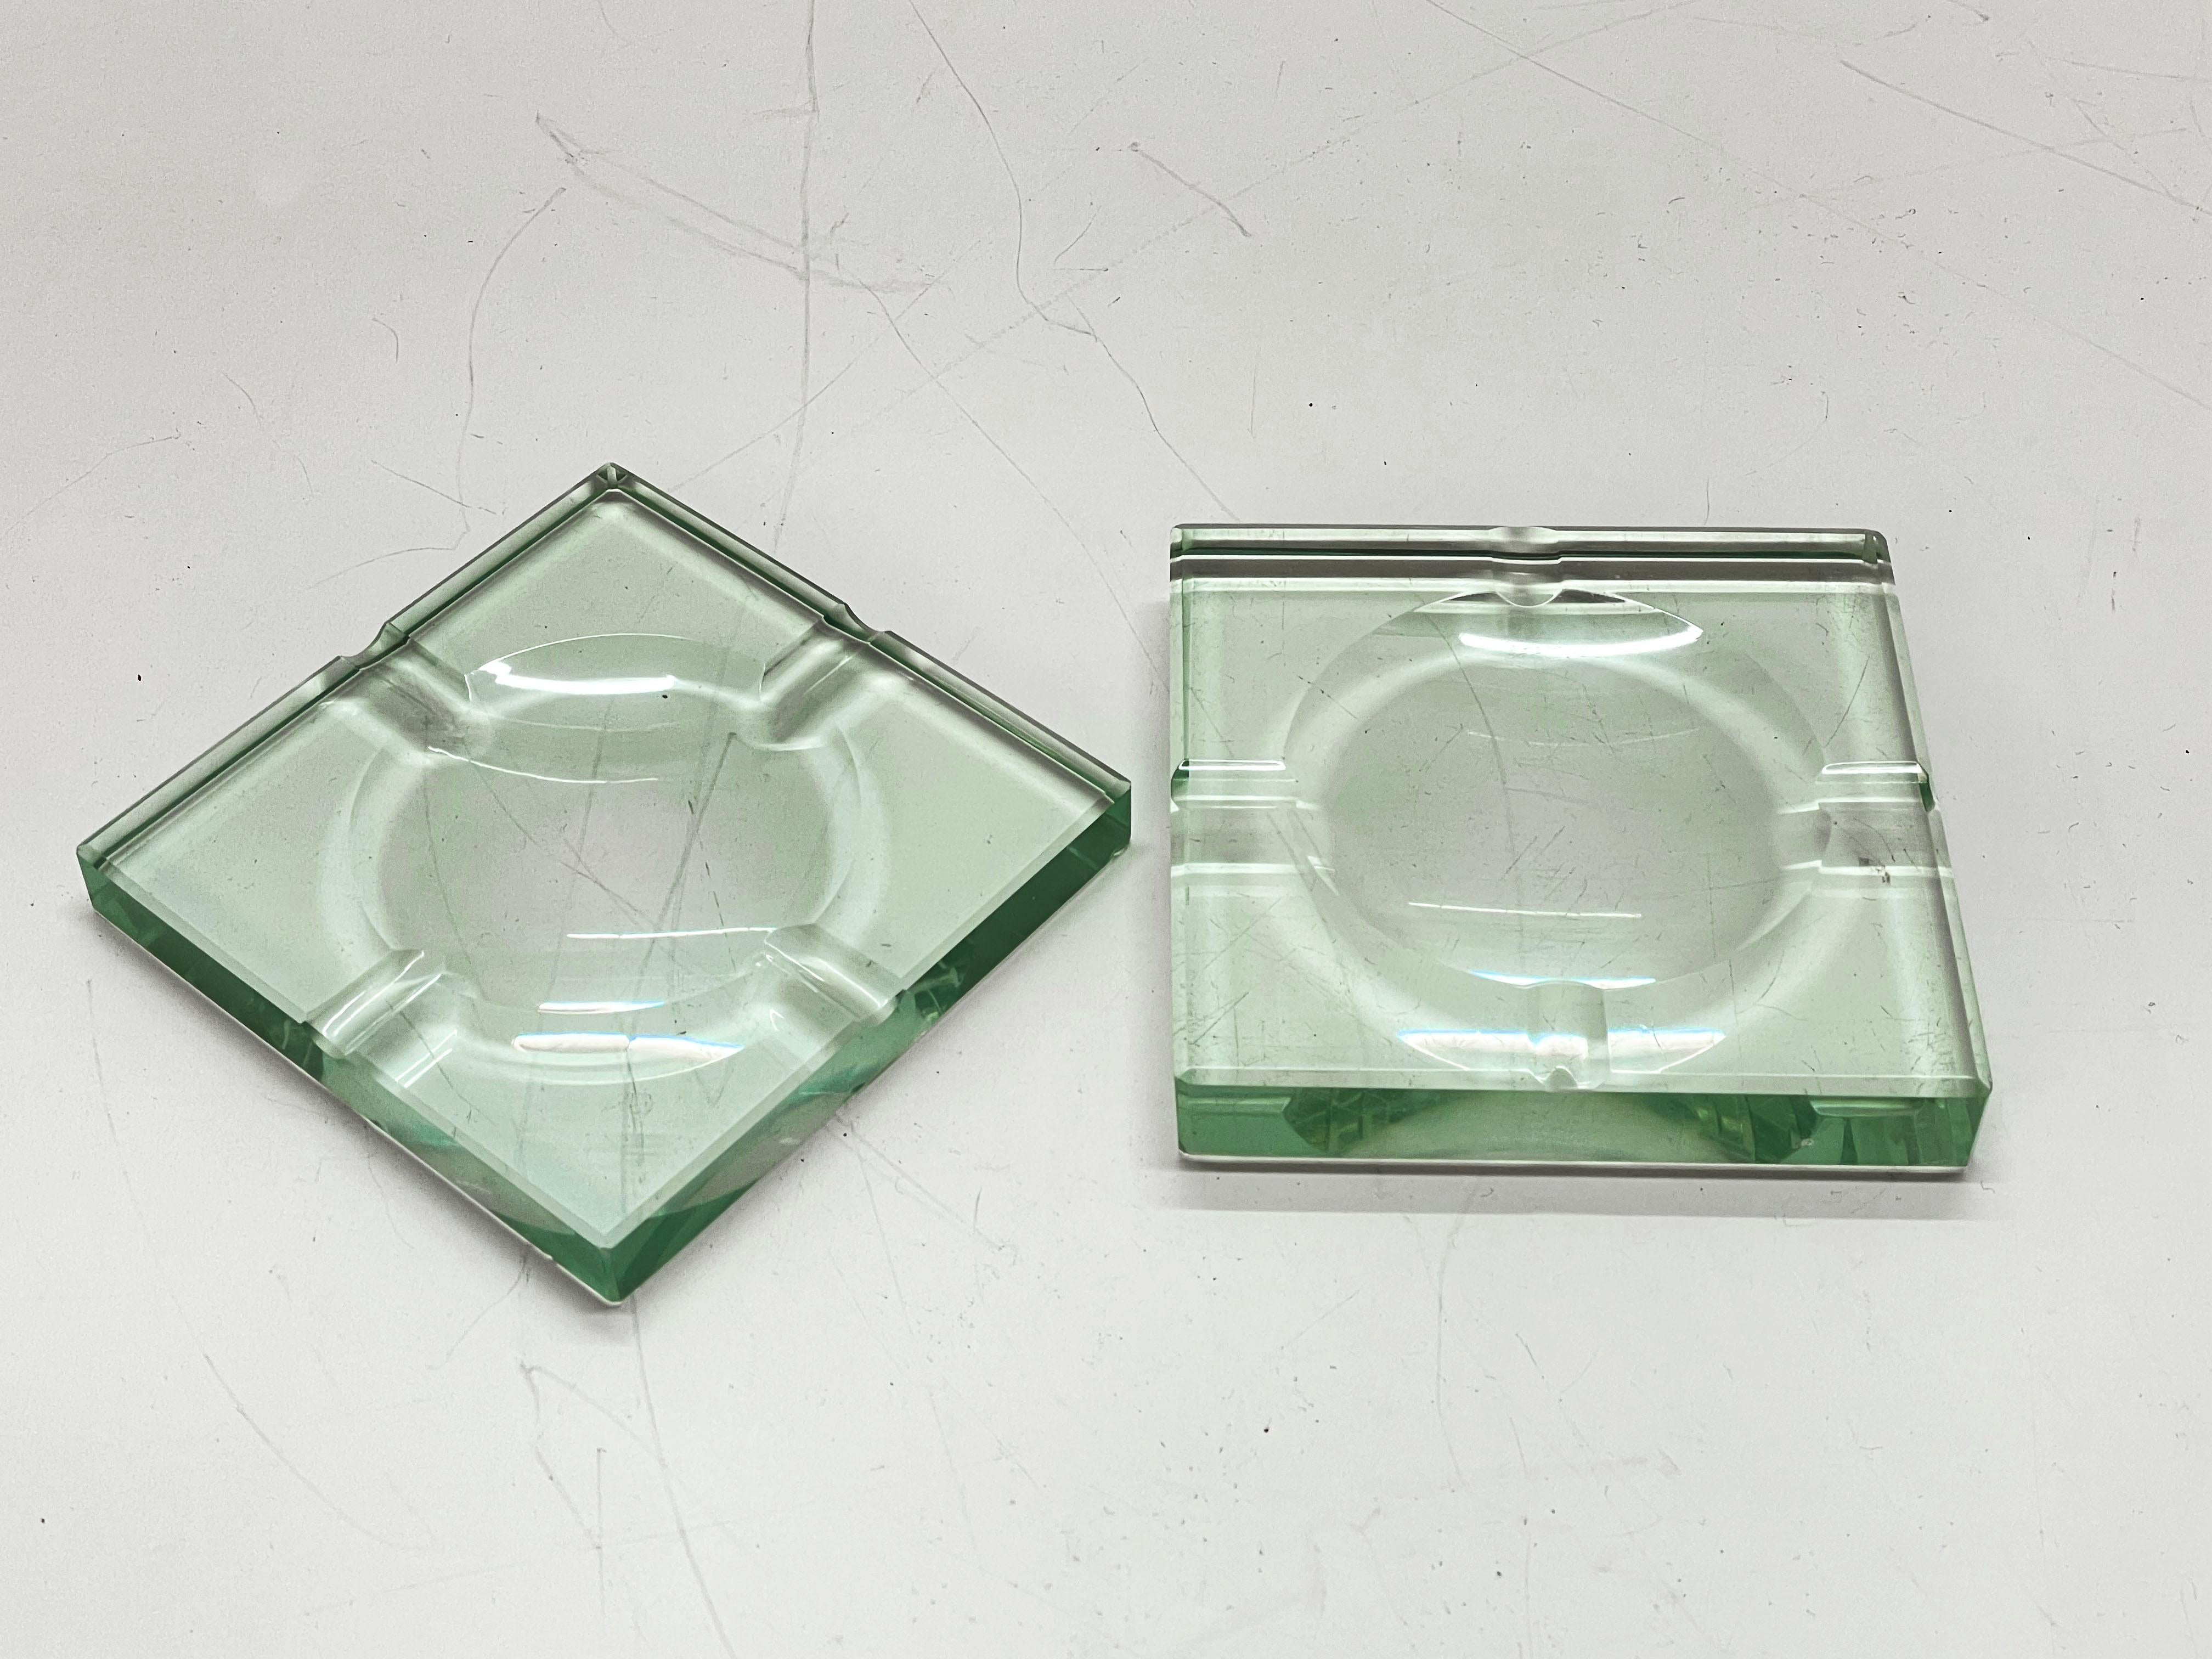 Two Incredible Mid-Century Modern square green glass ashtrays. These wonderful pieces were produced by Fontana Arte in Italy during the 1960s.

The items are in green square crystal with geometric carving, the Classic design of Fontana Arte from